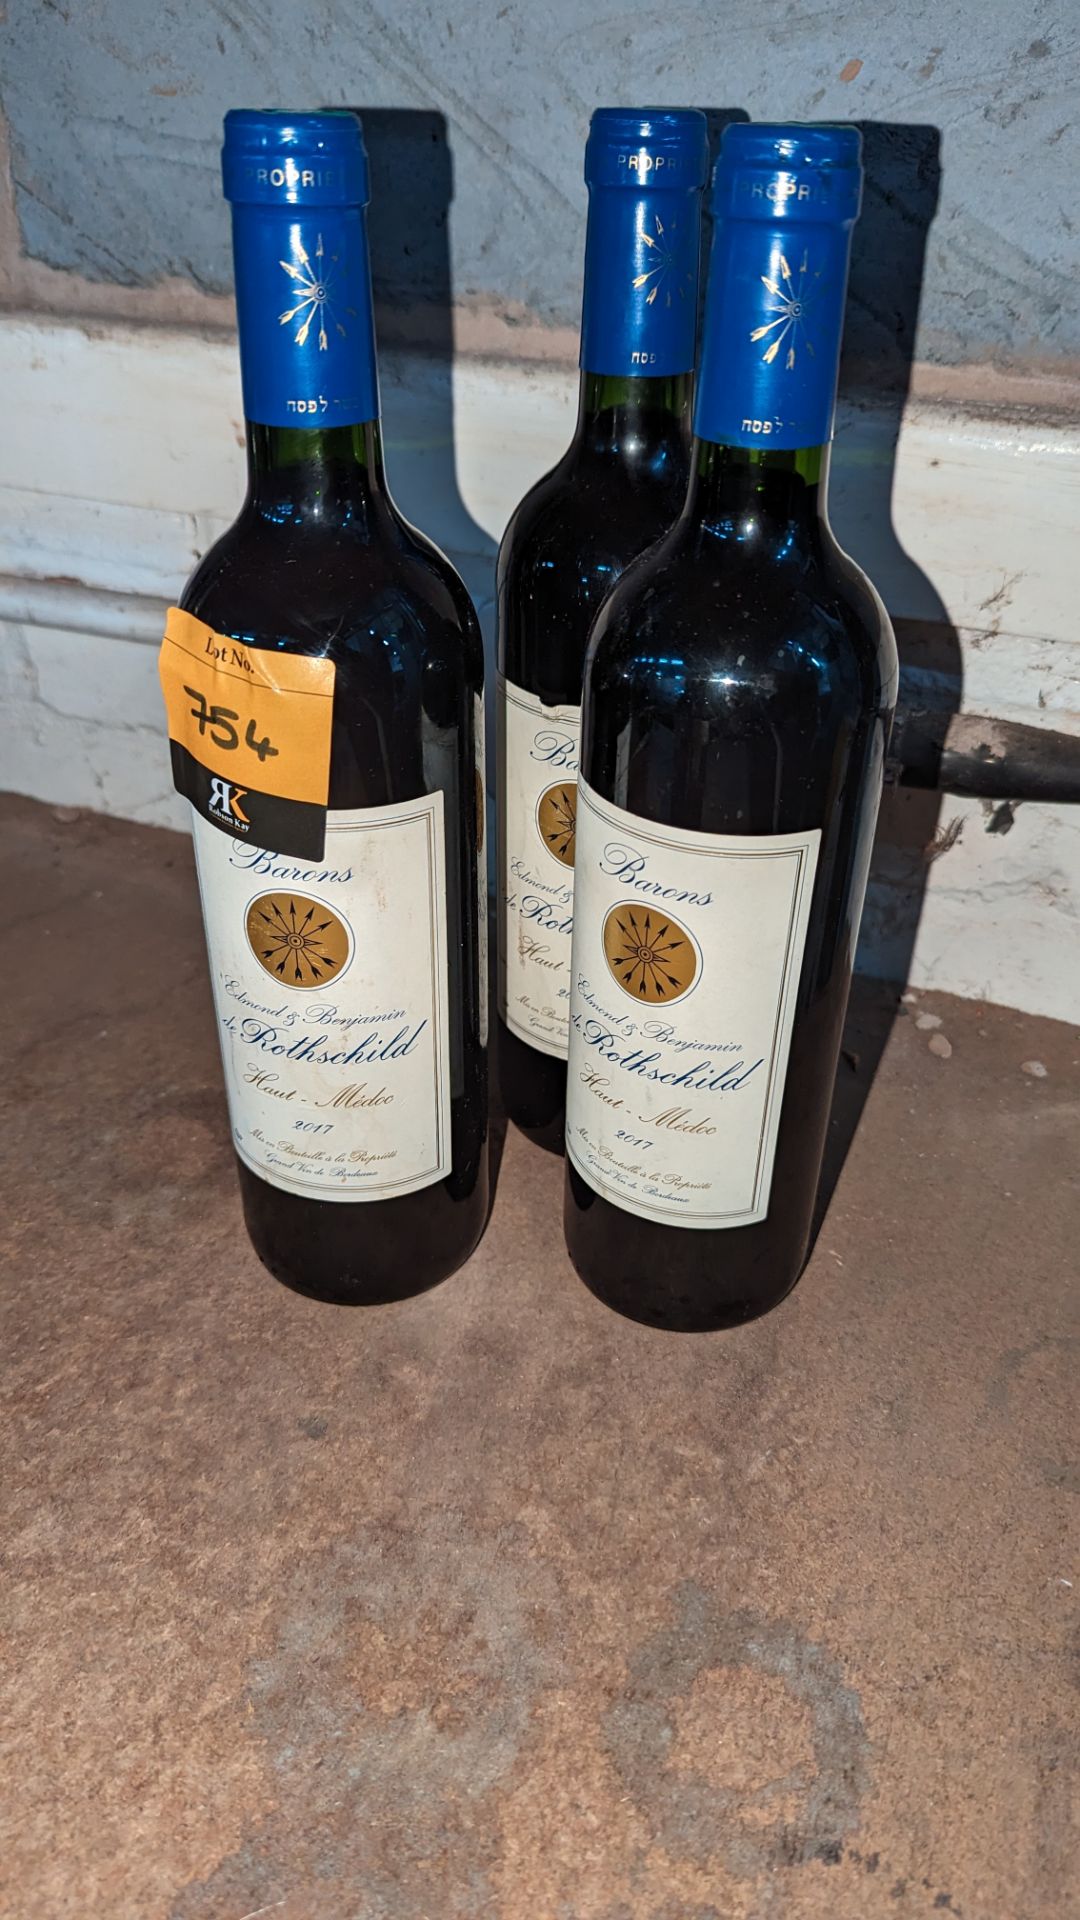 3 bottles of 2017 Barons Rothschild Haut-Médoc French red wine sold under AWRS number XQAW0000010101